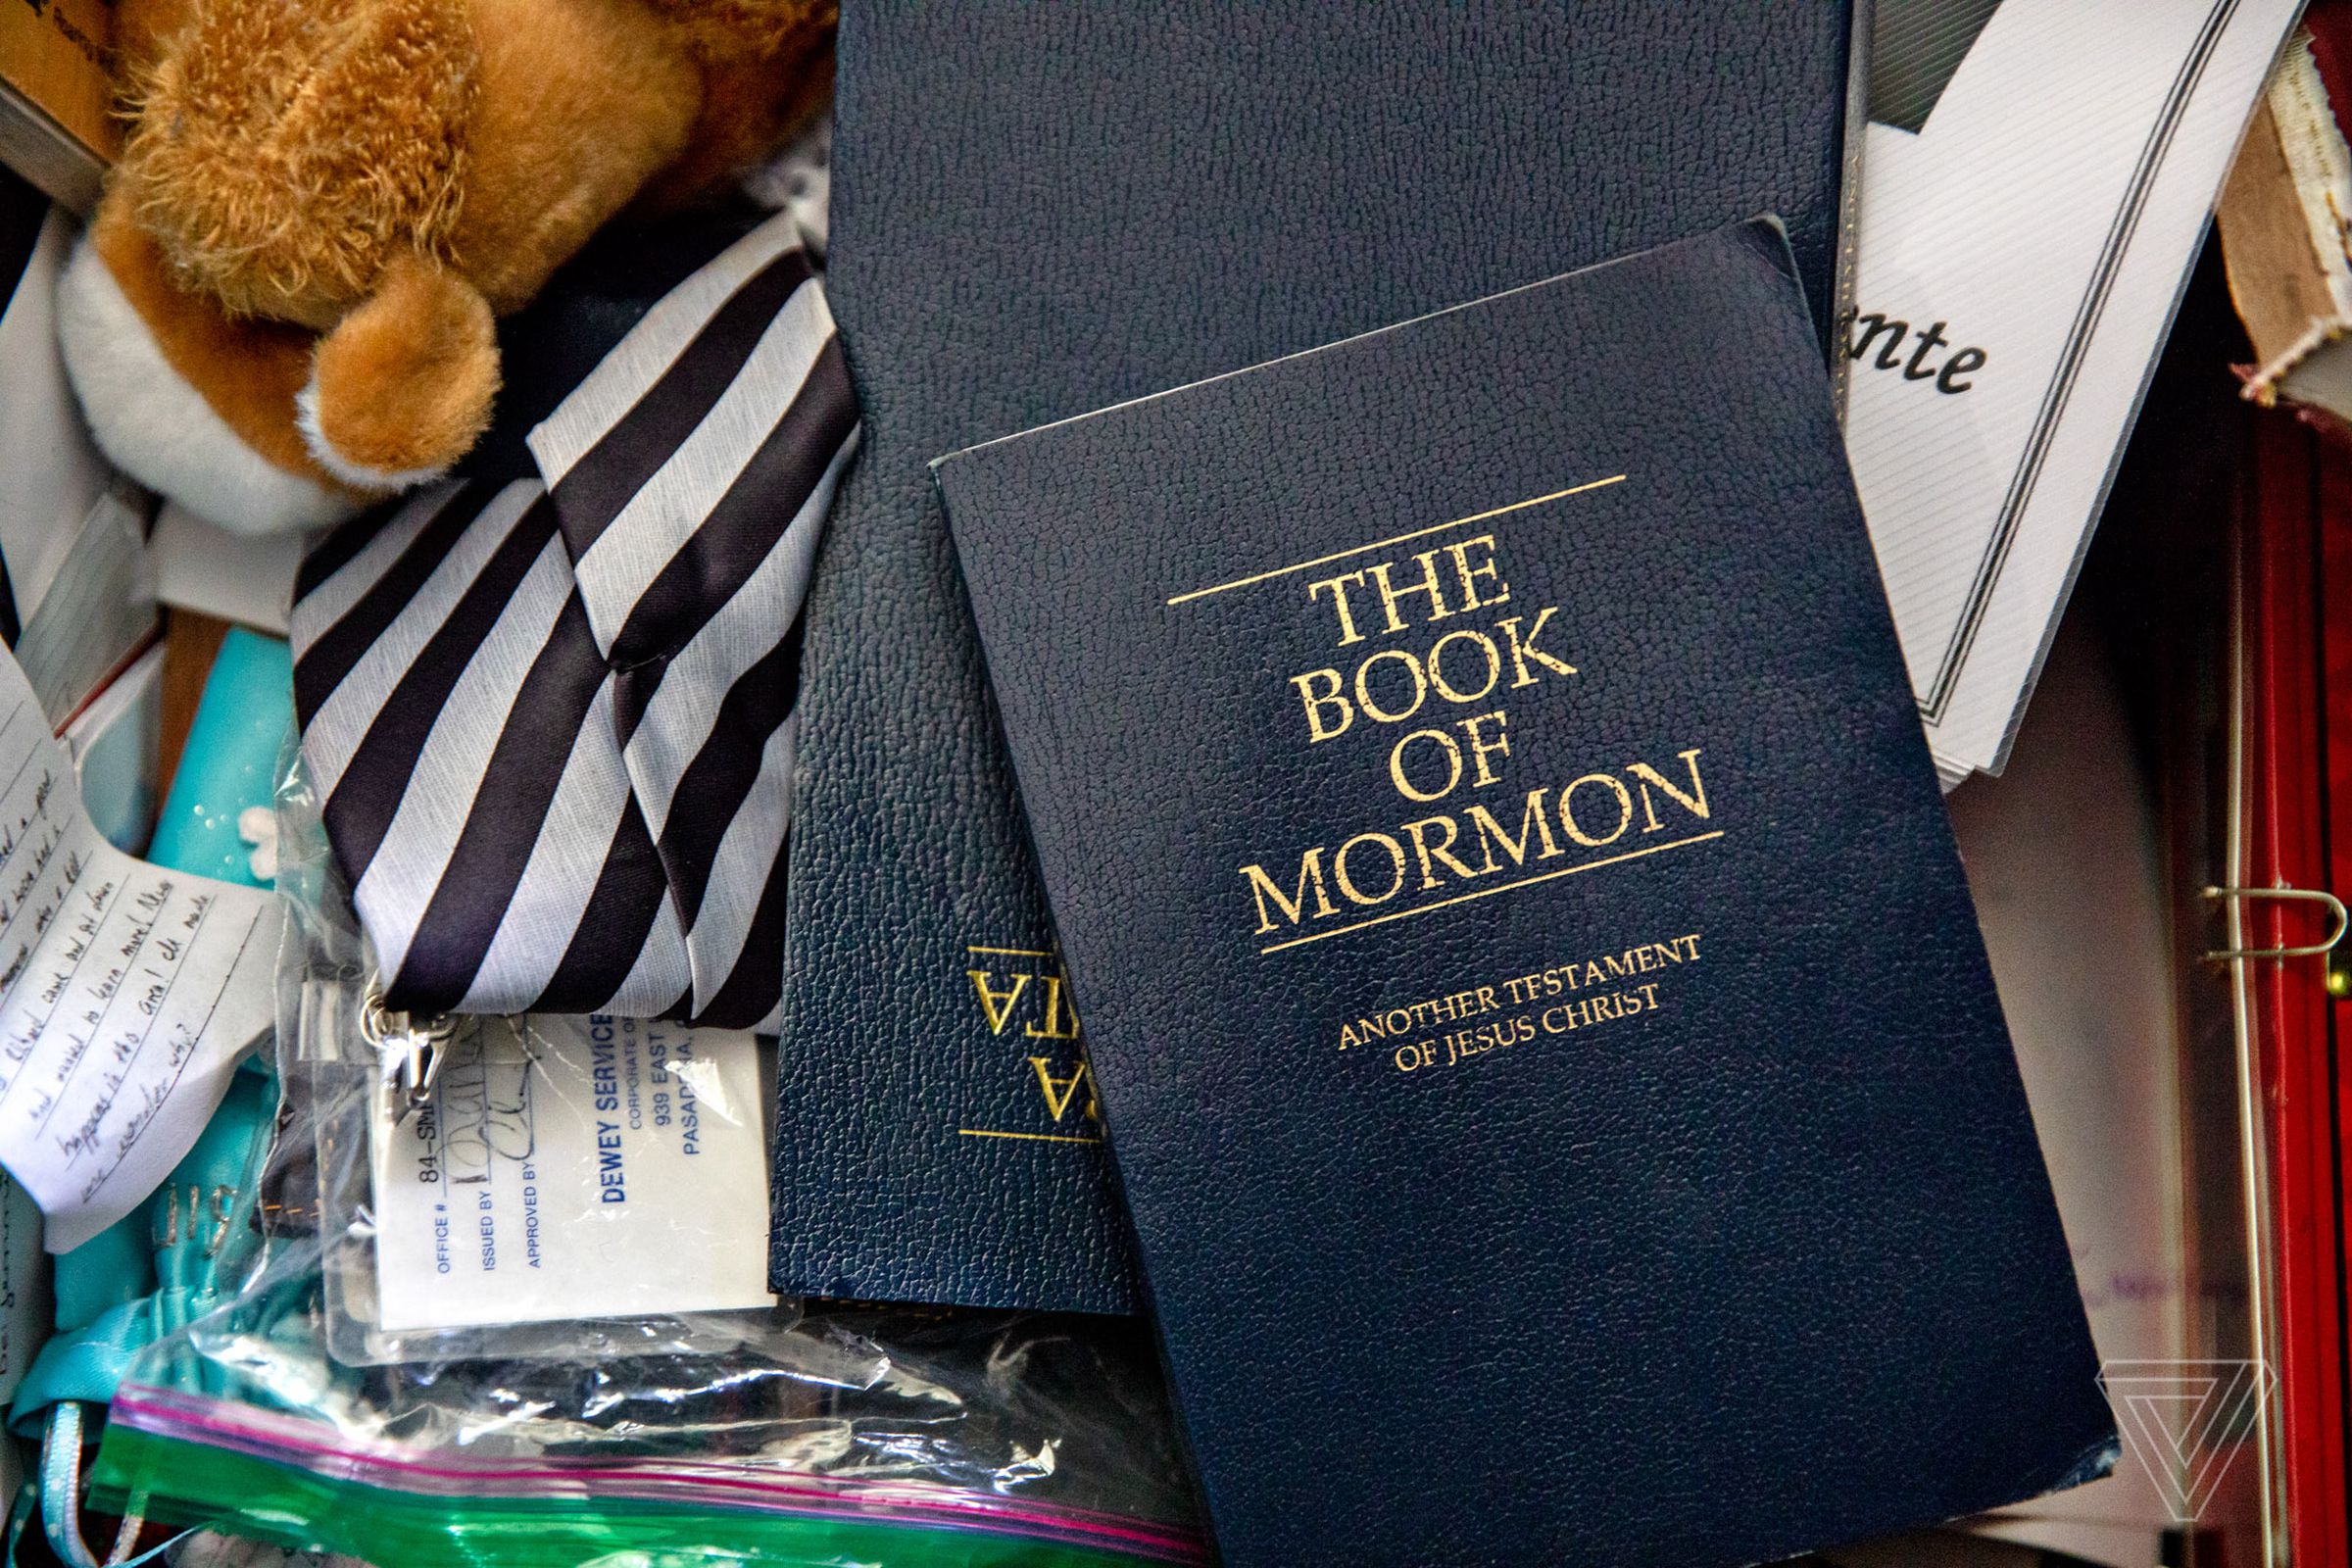 Joseph’s Book of Mormon and tie in a chest full of belongings from his mission for the LDS Church.